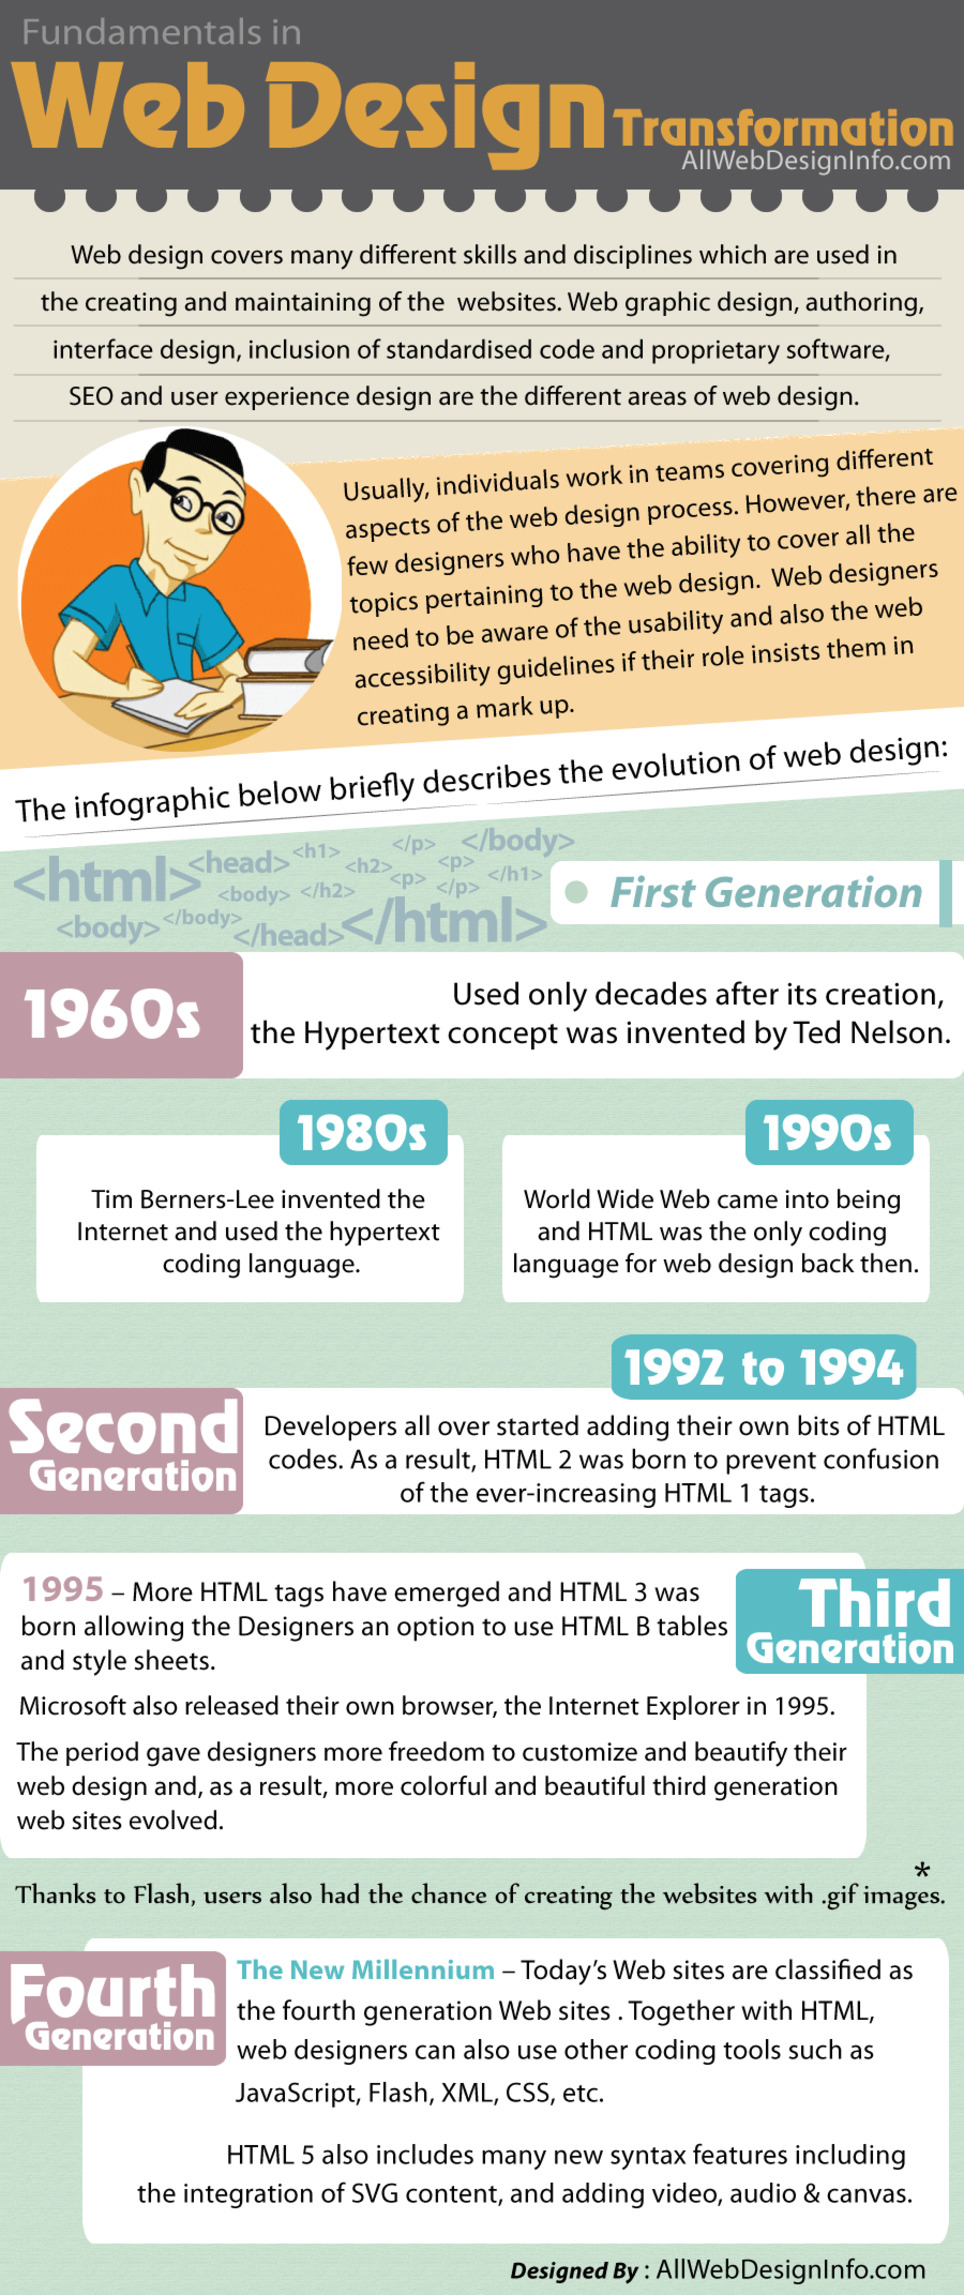 Web Design History & Transformation Through The Years [Infographic] | WebsiteDesign | Scoop.it